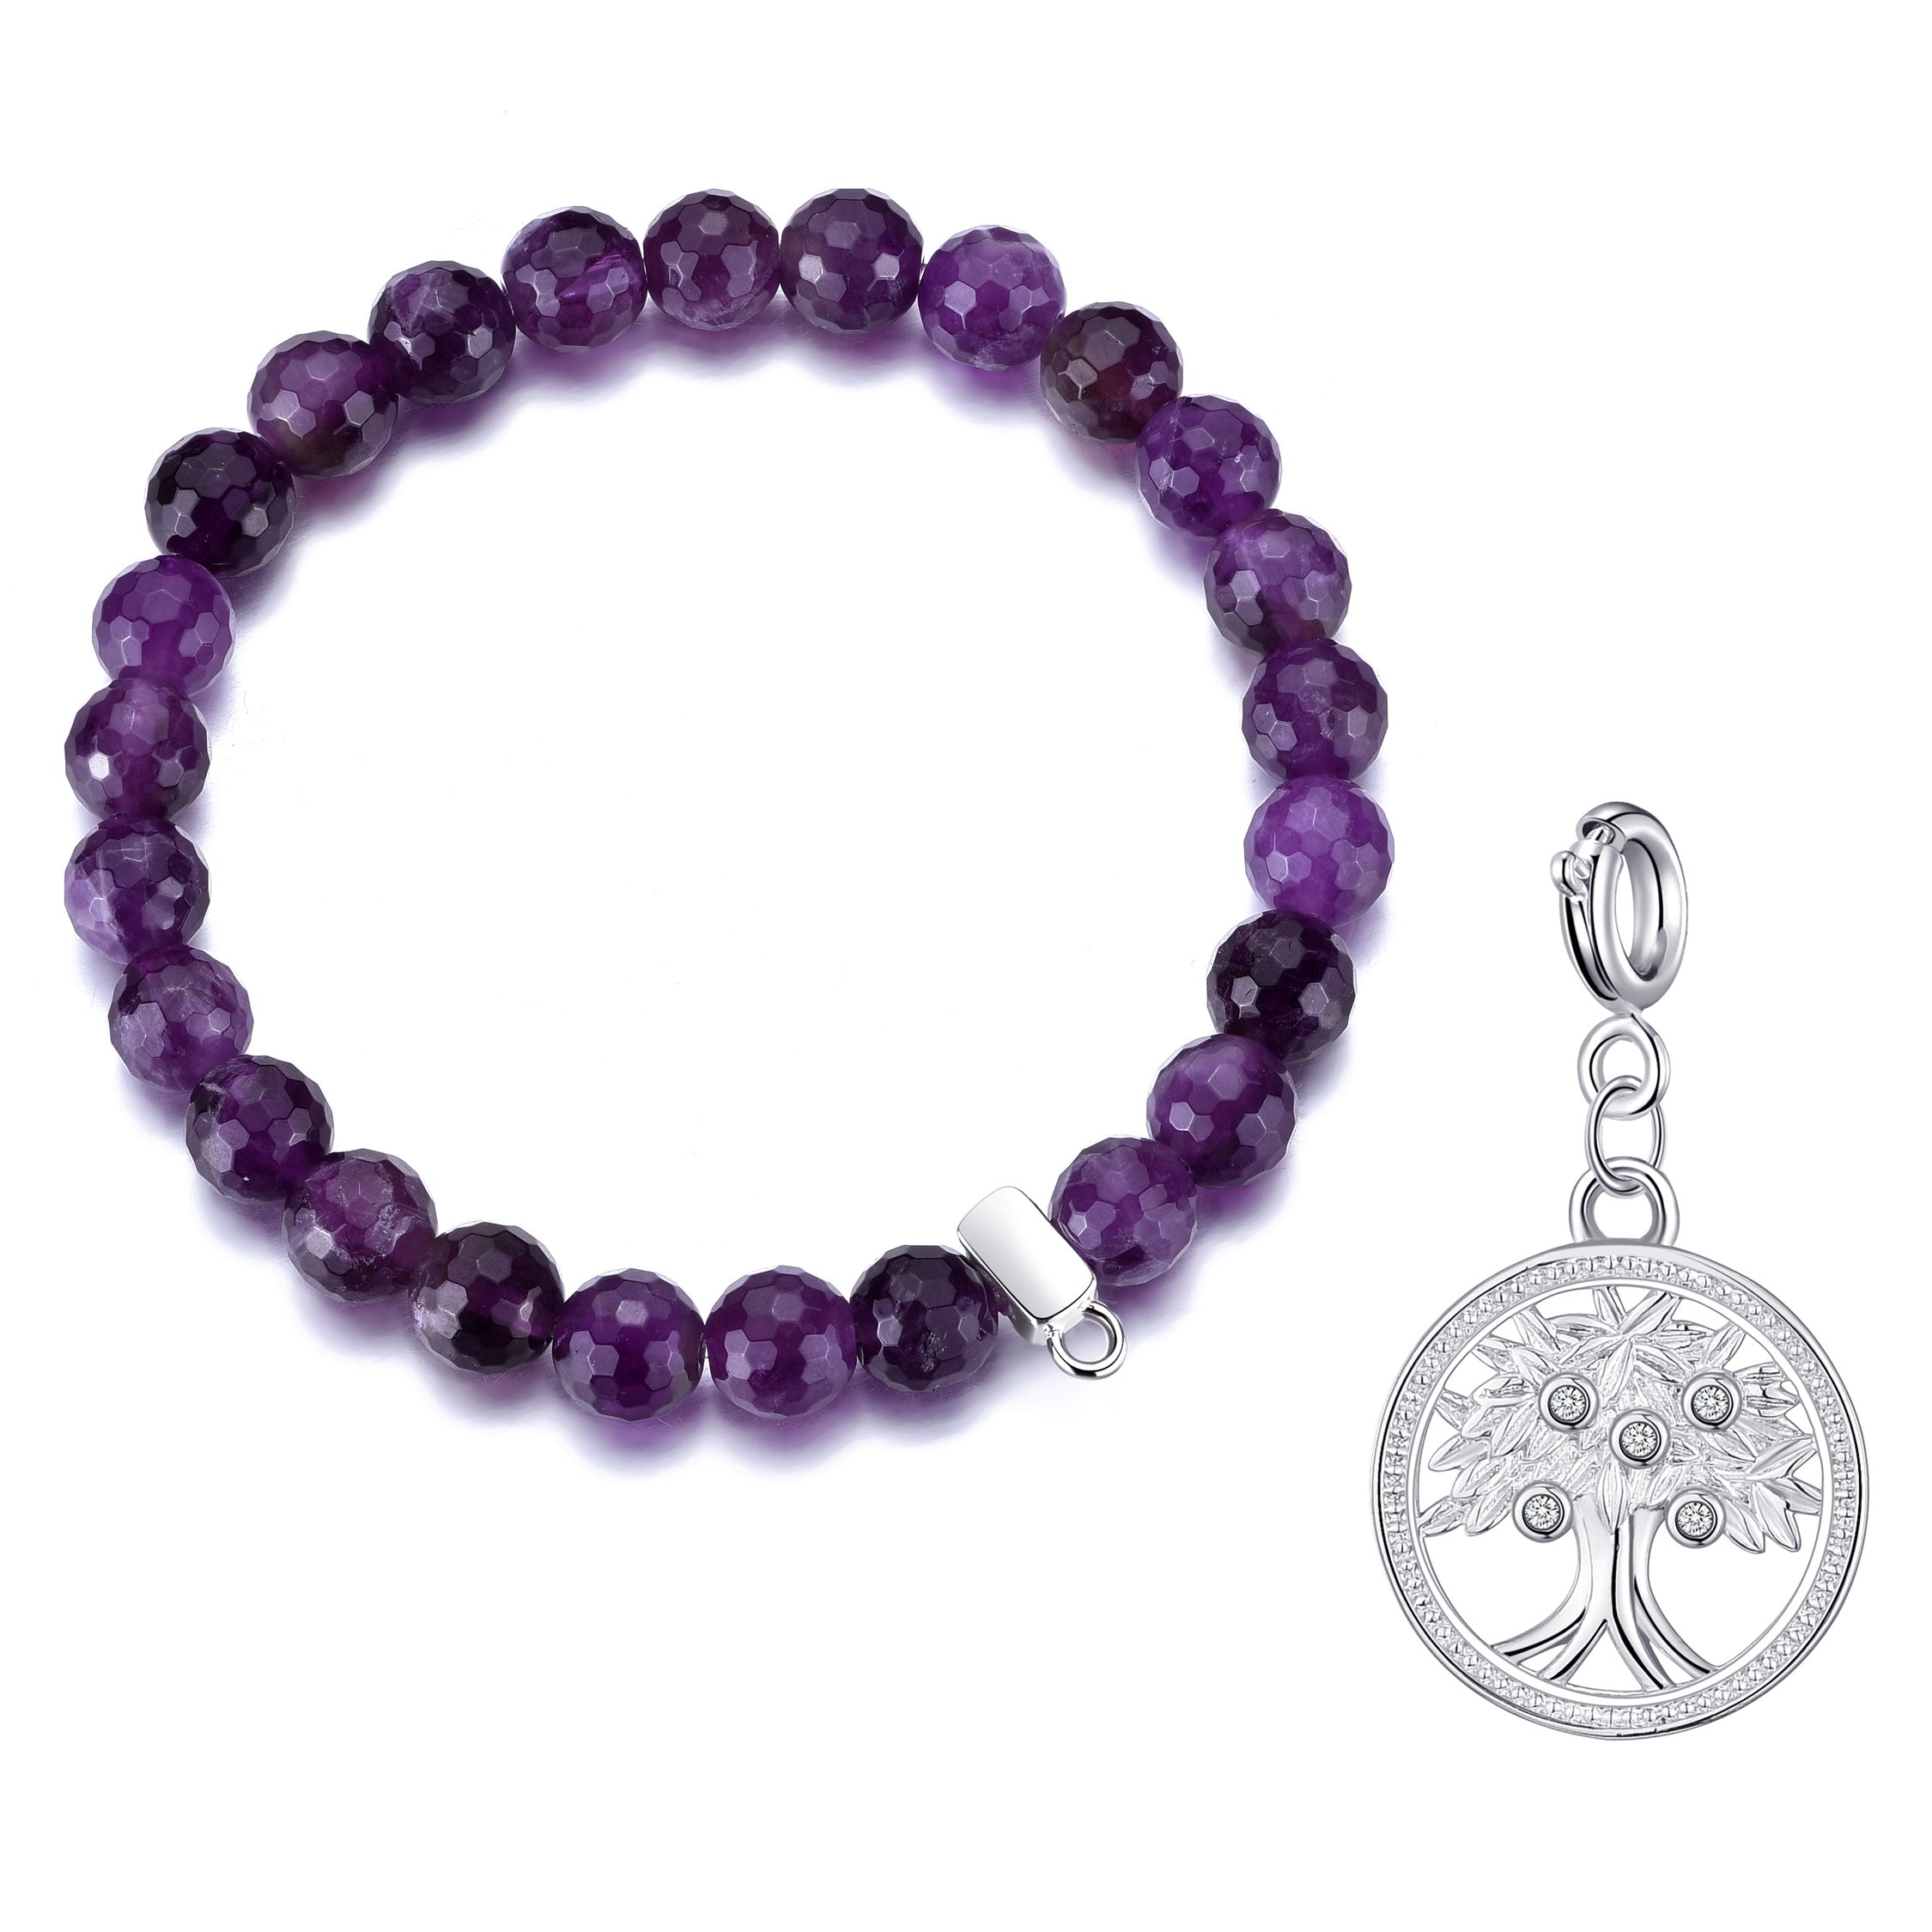 Faceted Amethyst Gemstone Bracelet with Charm Created with Zircondia® Crystals